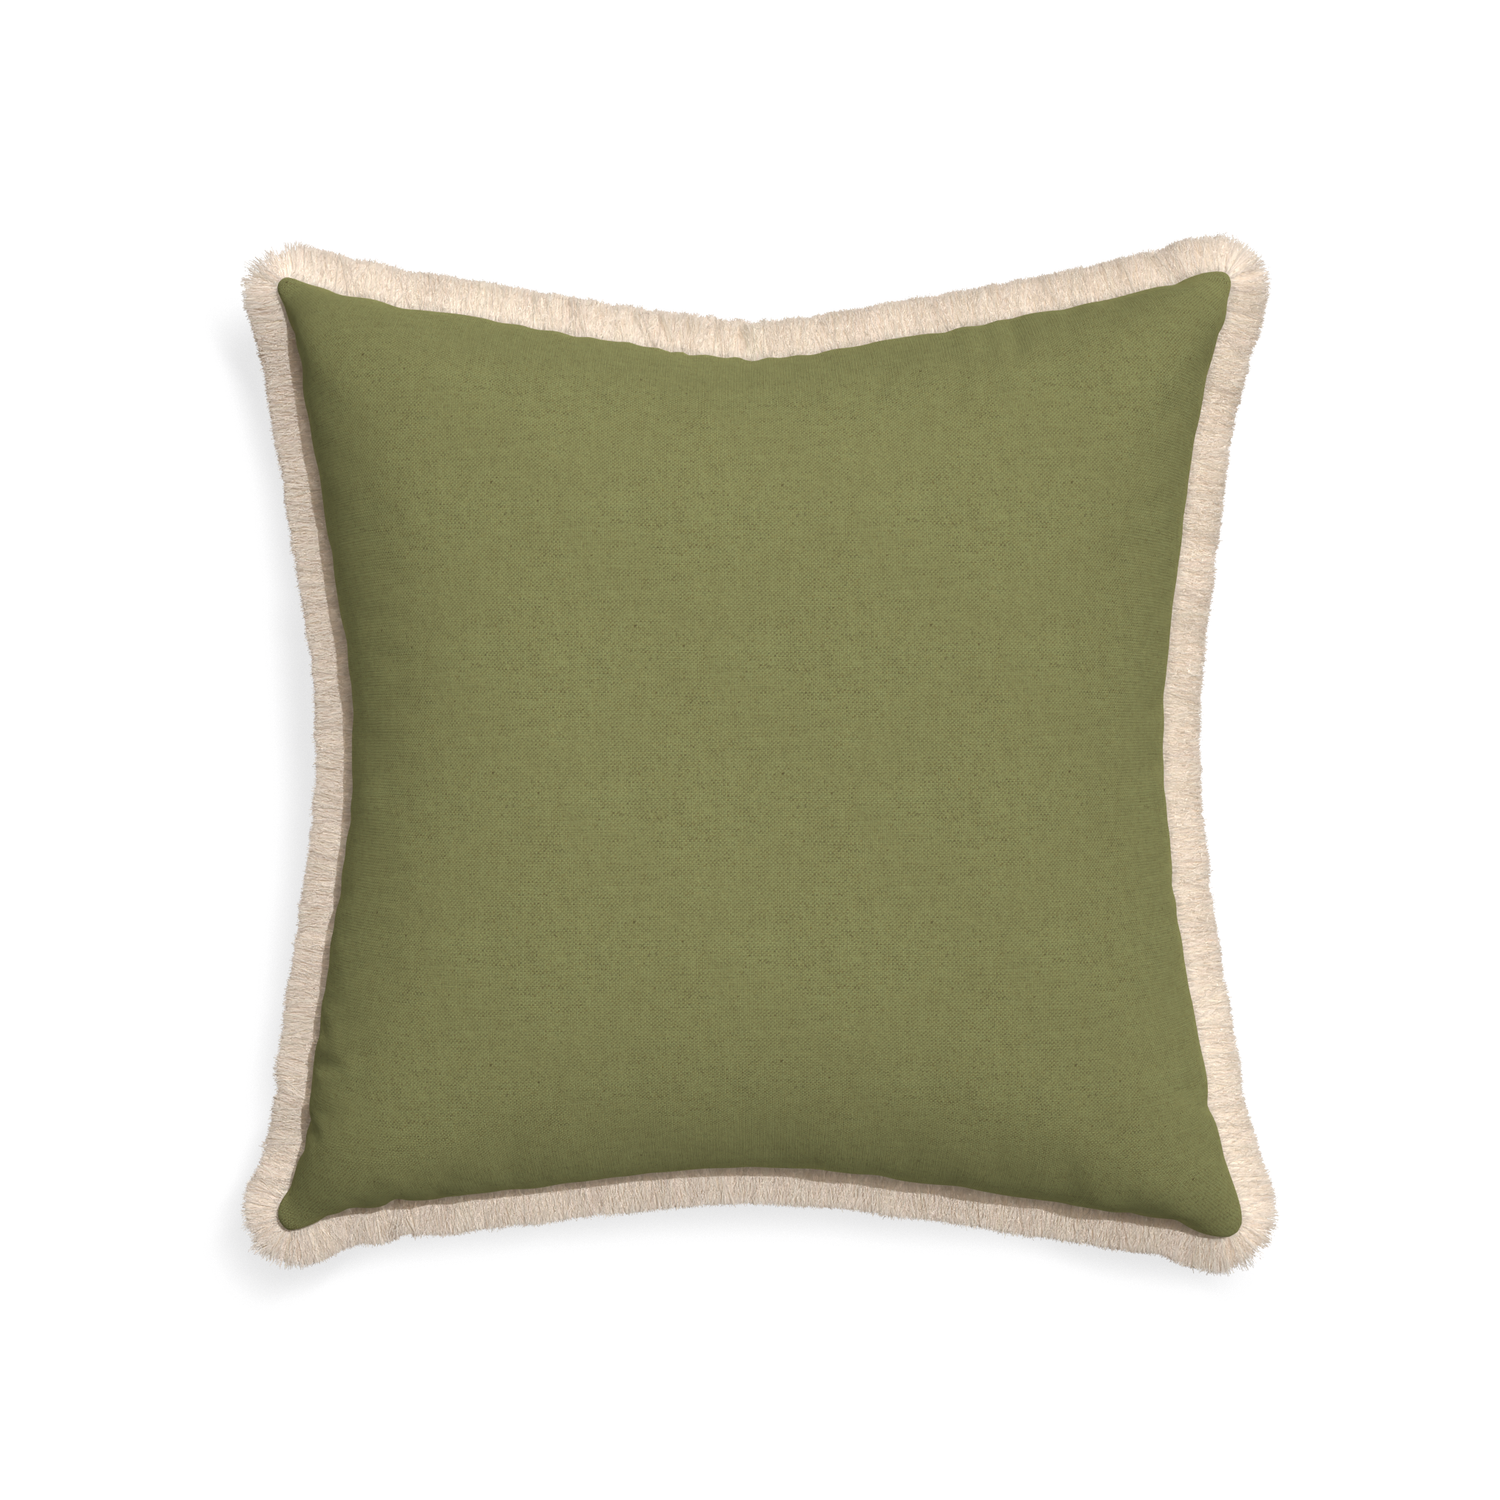 22-square moss custom moss greenpillow with cream fringe on white background